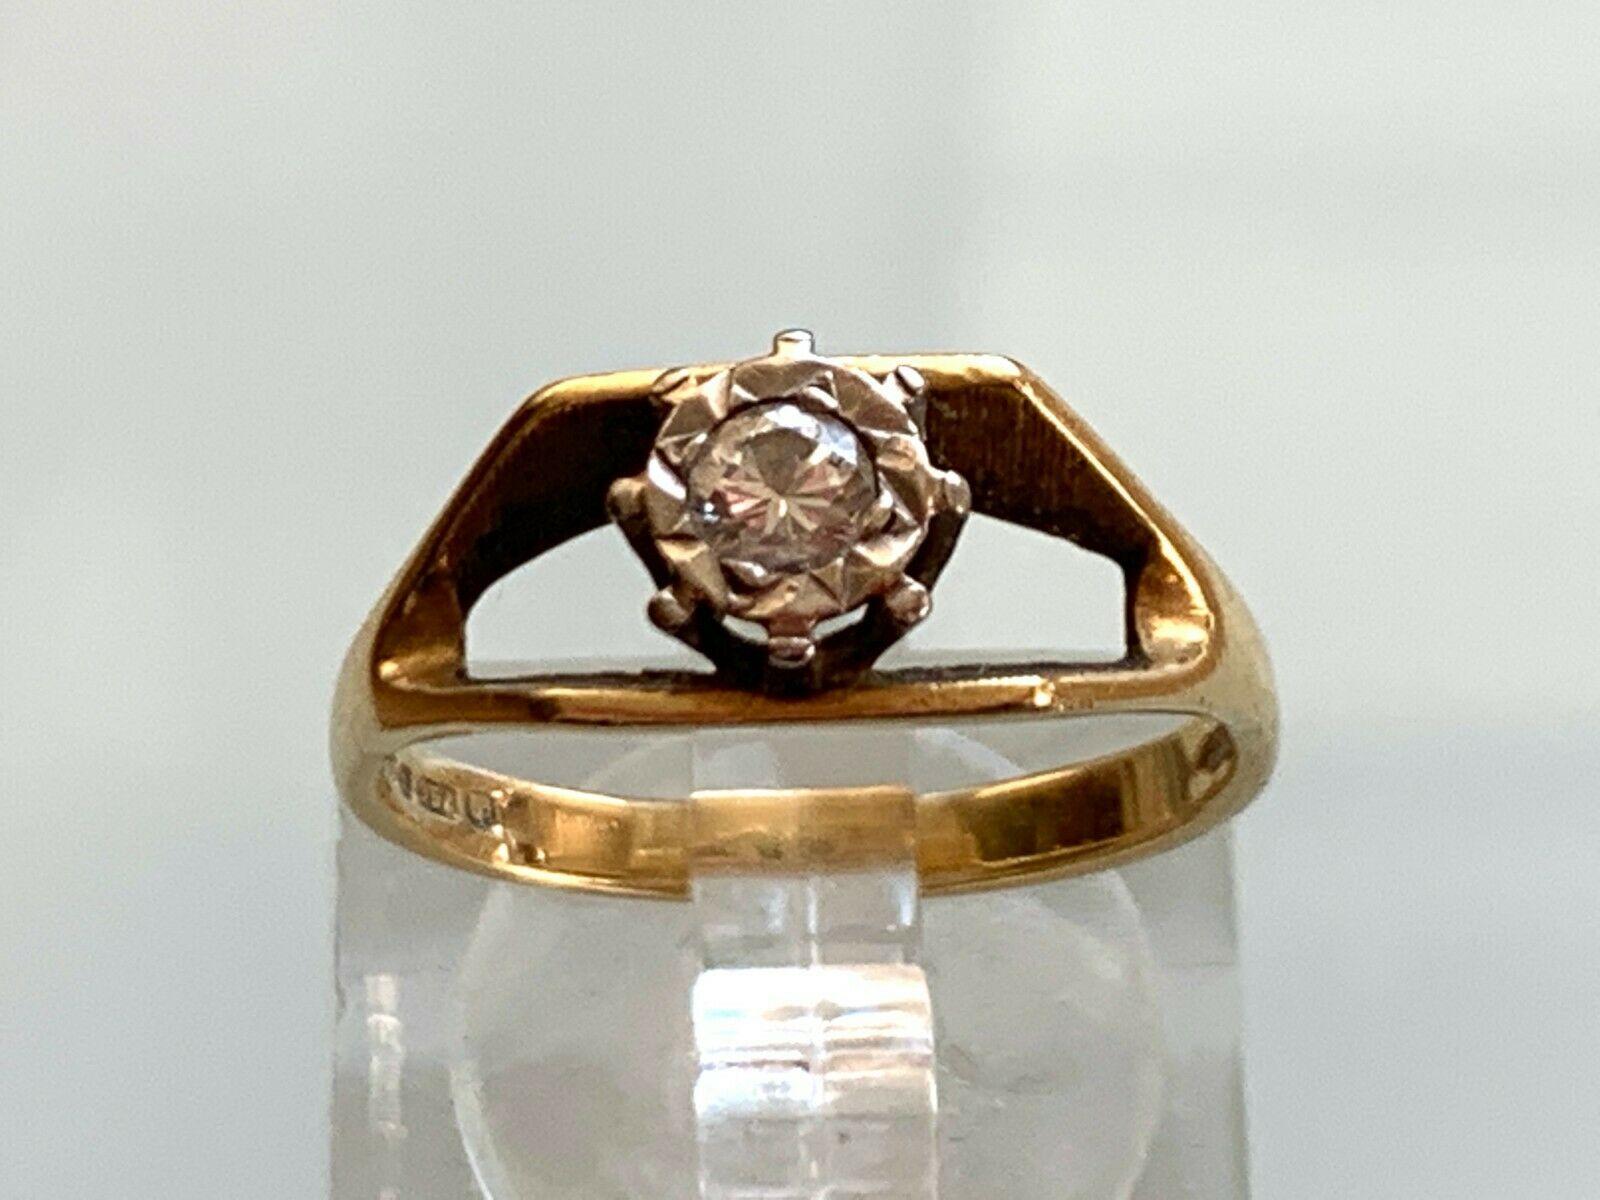 Vintage 18ct 750  Gold 0.10 Carat Diamond Ring 
3mm Genuine natural diamond 
set within  platinum framed in an 18ct Gold Ring 
Fully Hallmarked date letter A - 1975. Makers F.O
U.K  N
U.S  6 1/2
inside band diameter 16.92 mm
Beautiful feminine ring 
